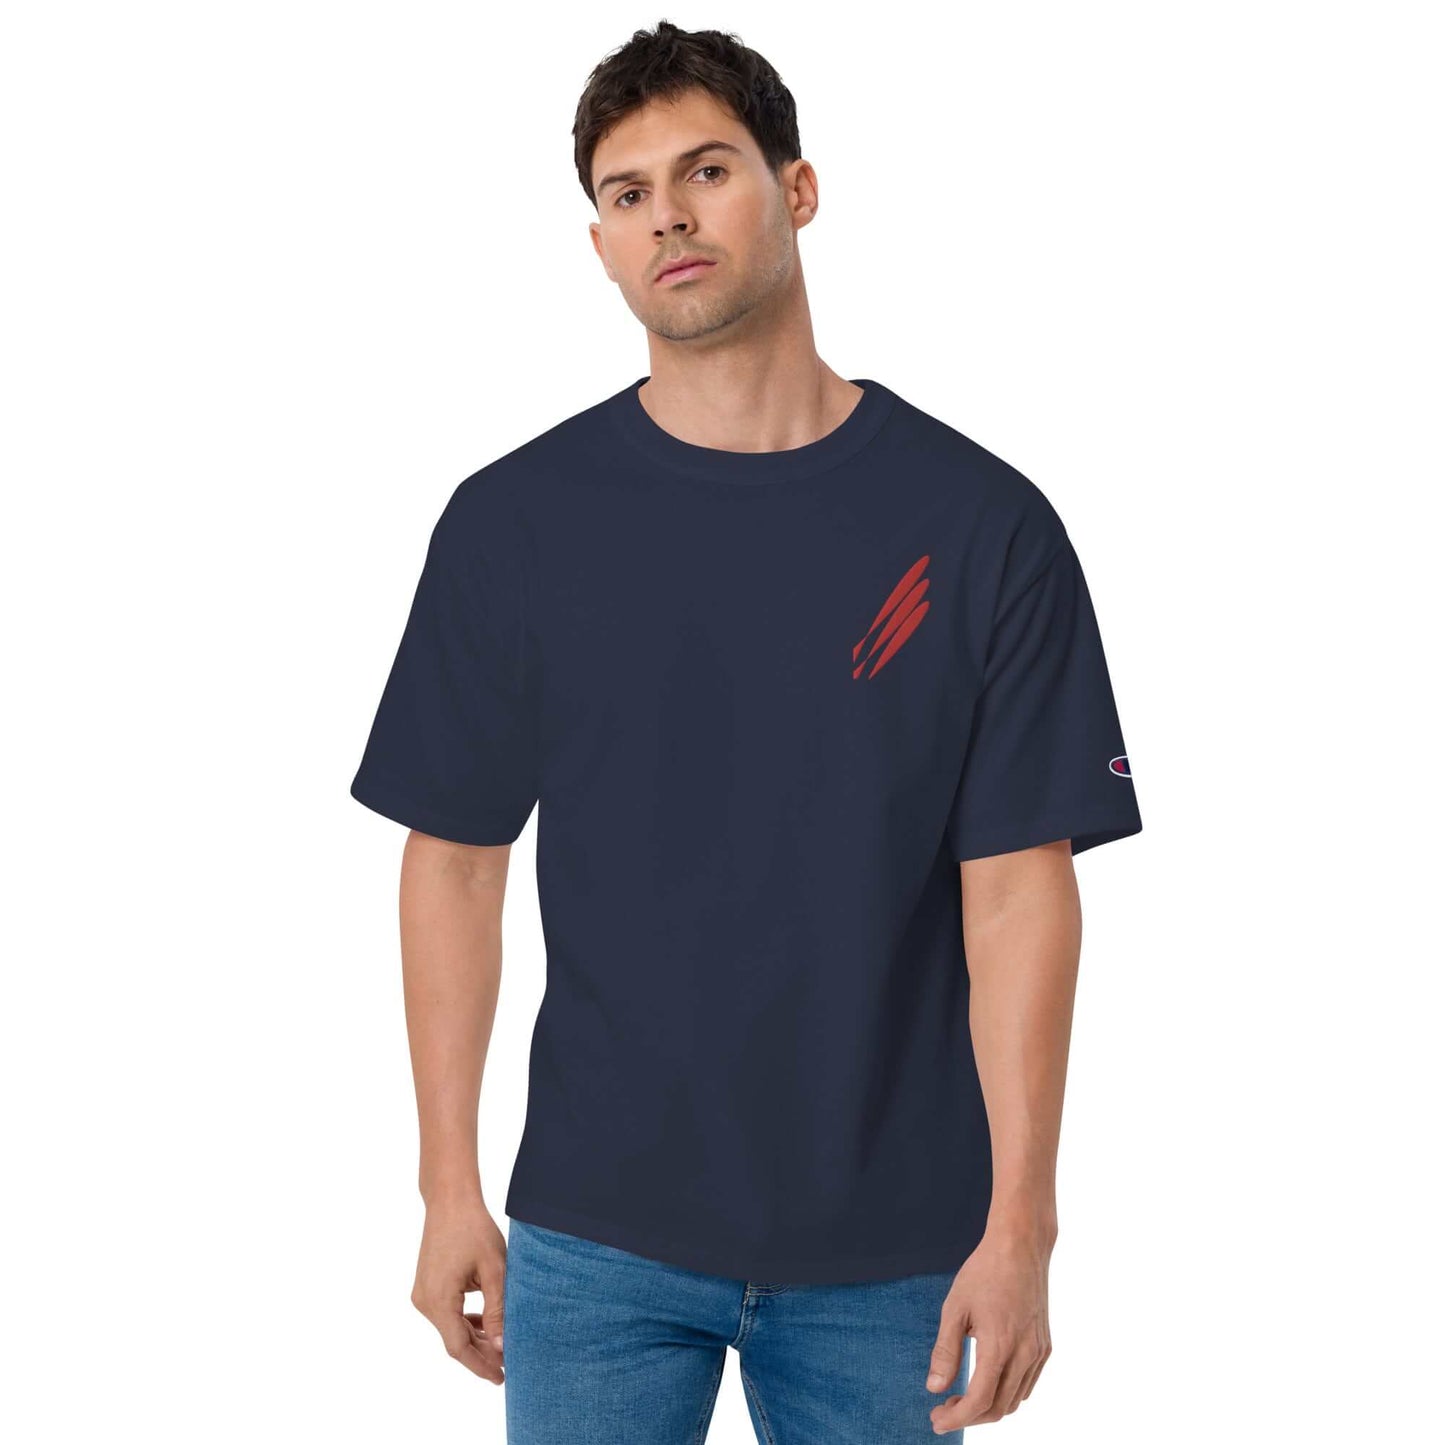 mens-embroidered-champion-t-shirt-navy-blue